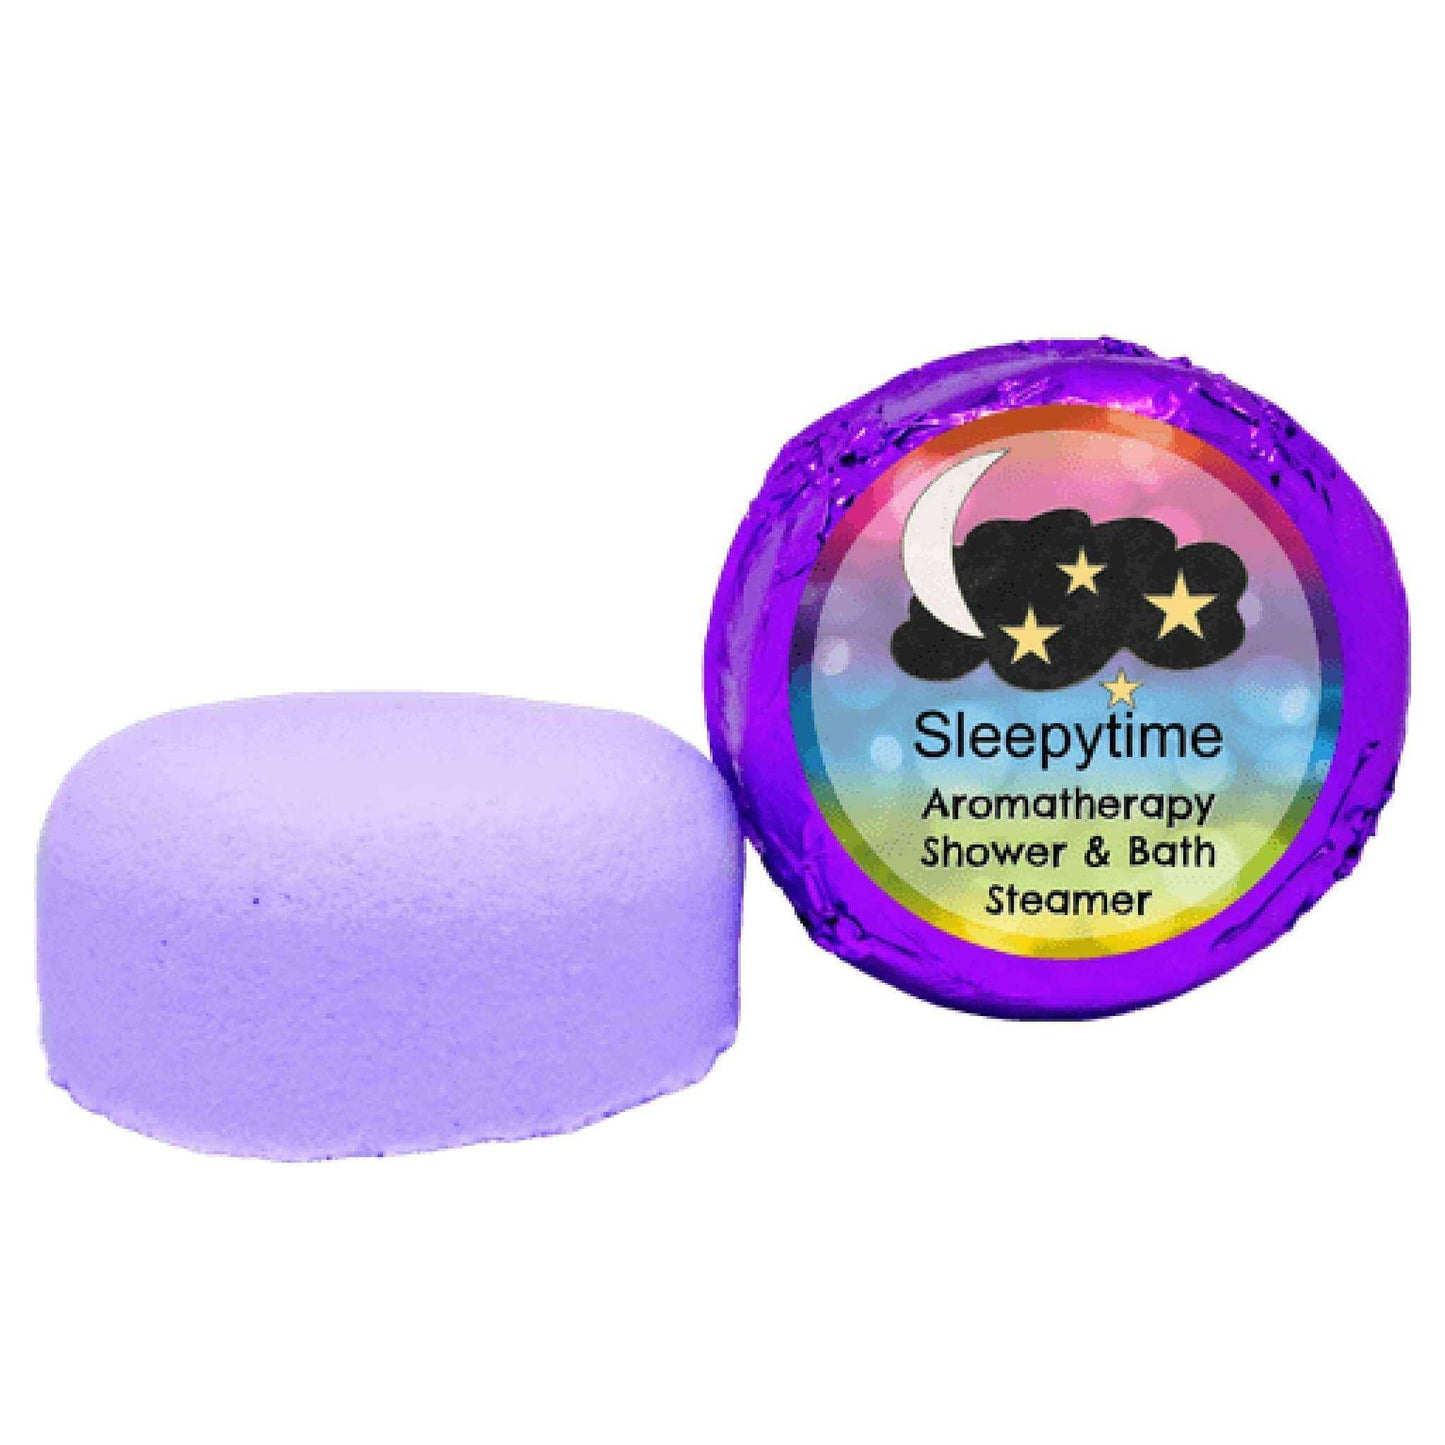 Experience a restful night with Sleepytime Shower Steamer. Our aromatherapy shower steamer is the perfect bedtime companion!